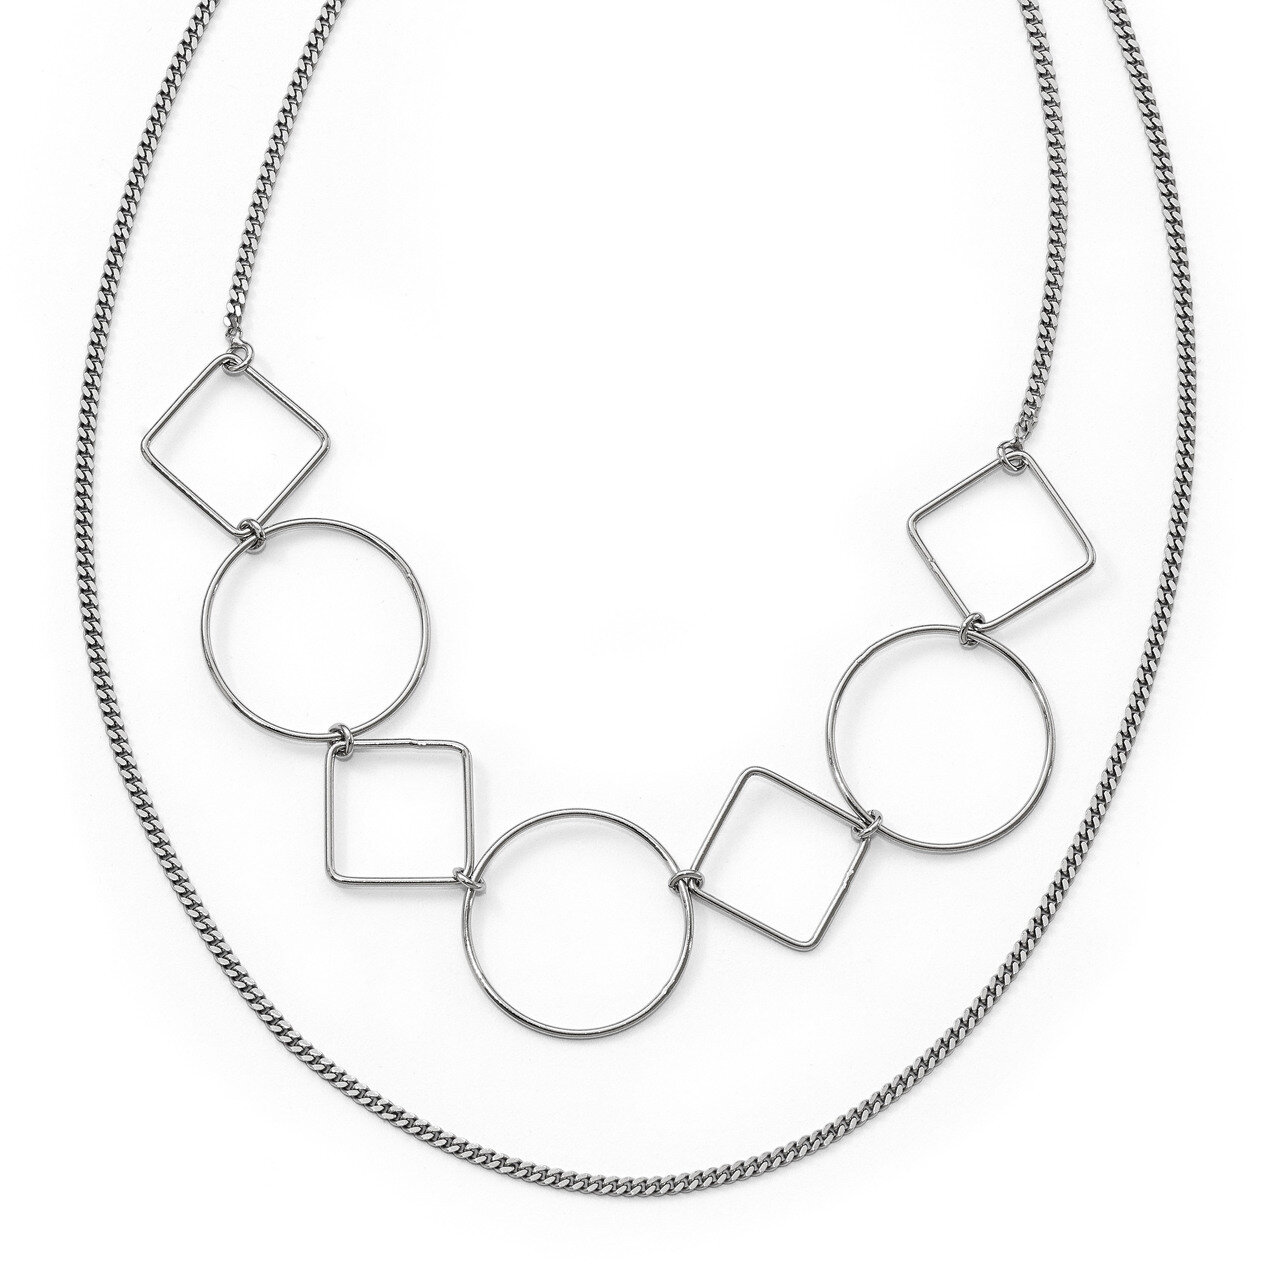 Polished Double-strand Necklace Sterling Silver QLF658-20